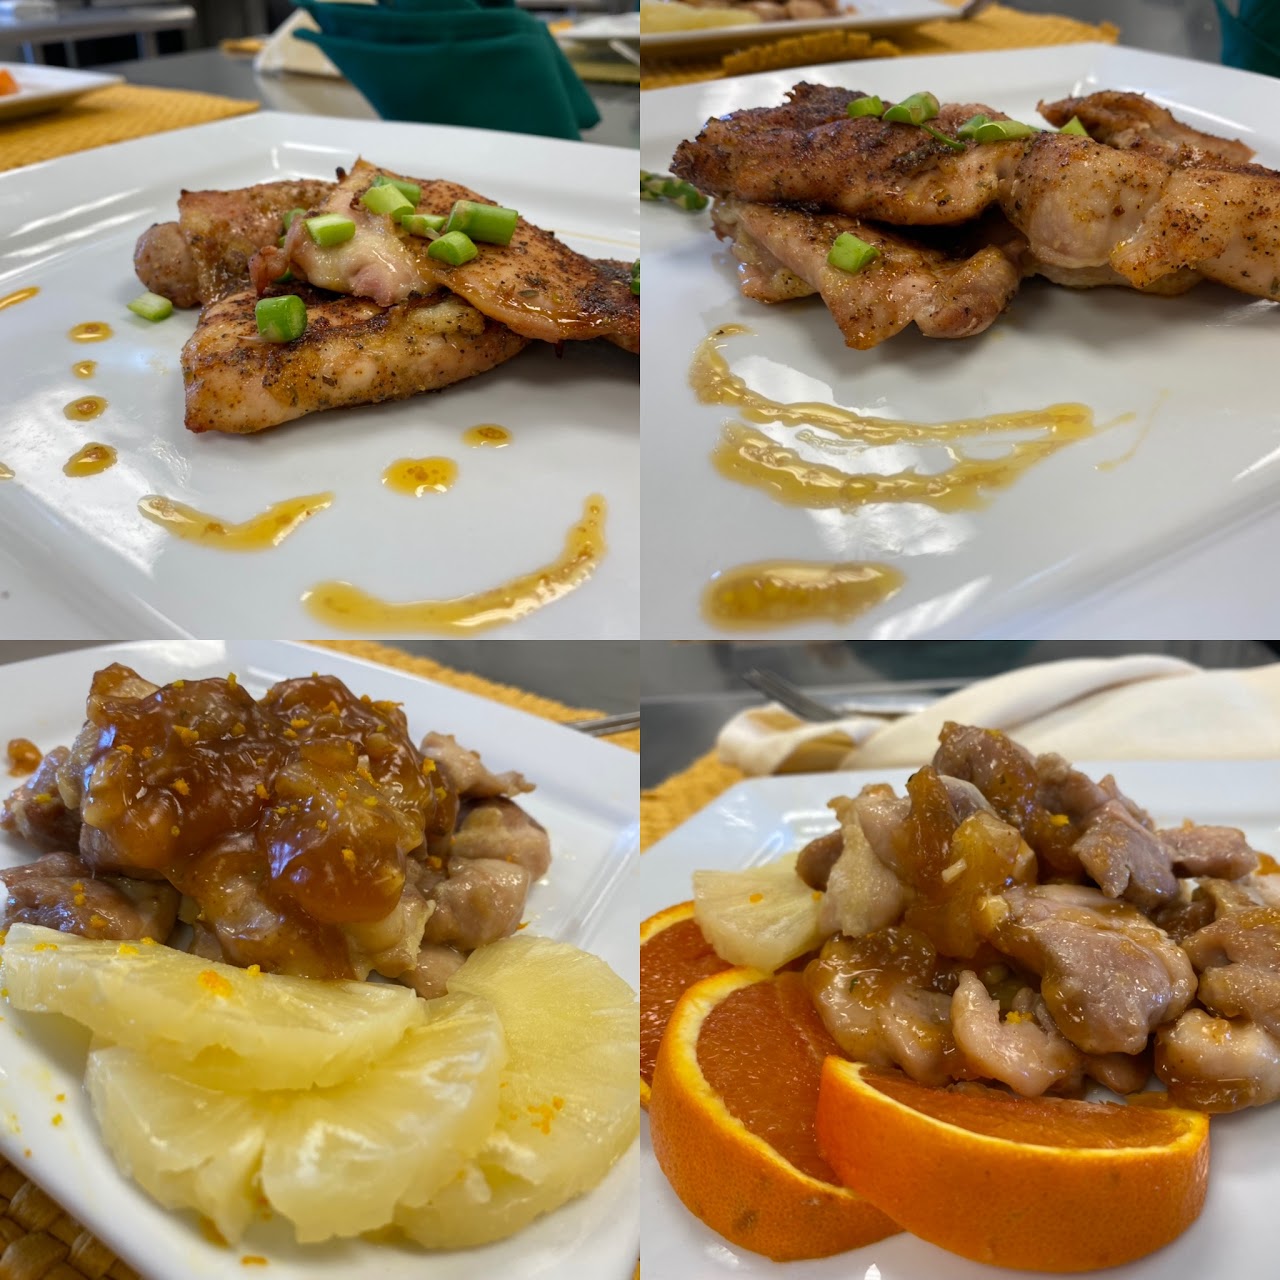 Meals made in the culinary kitchen